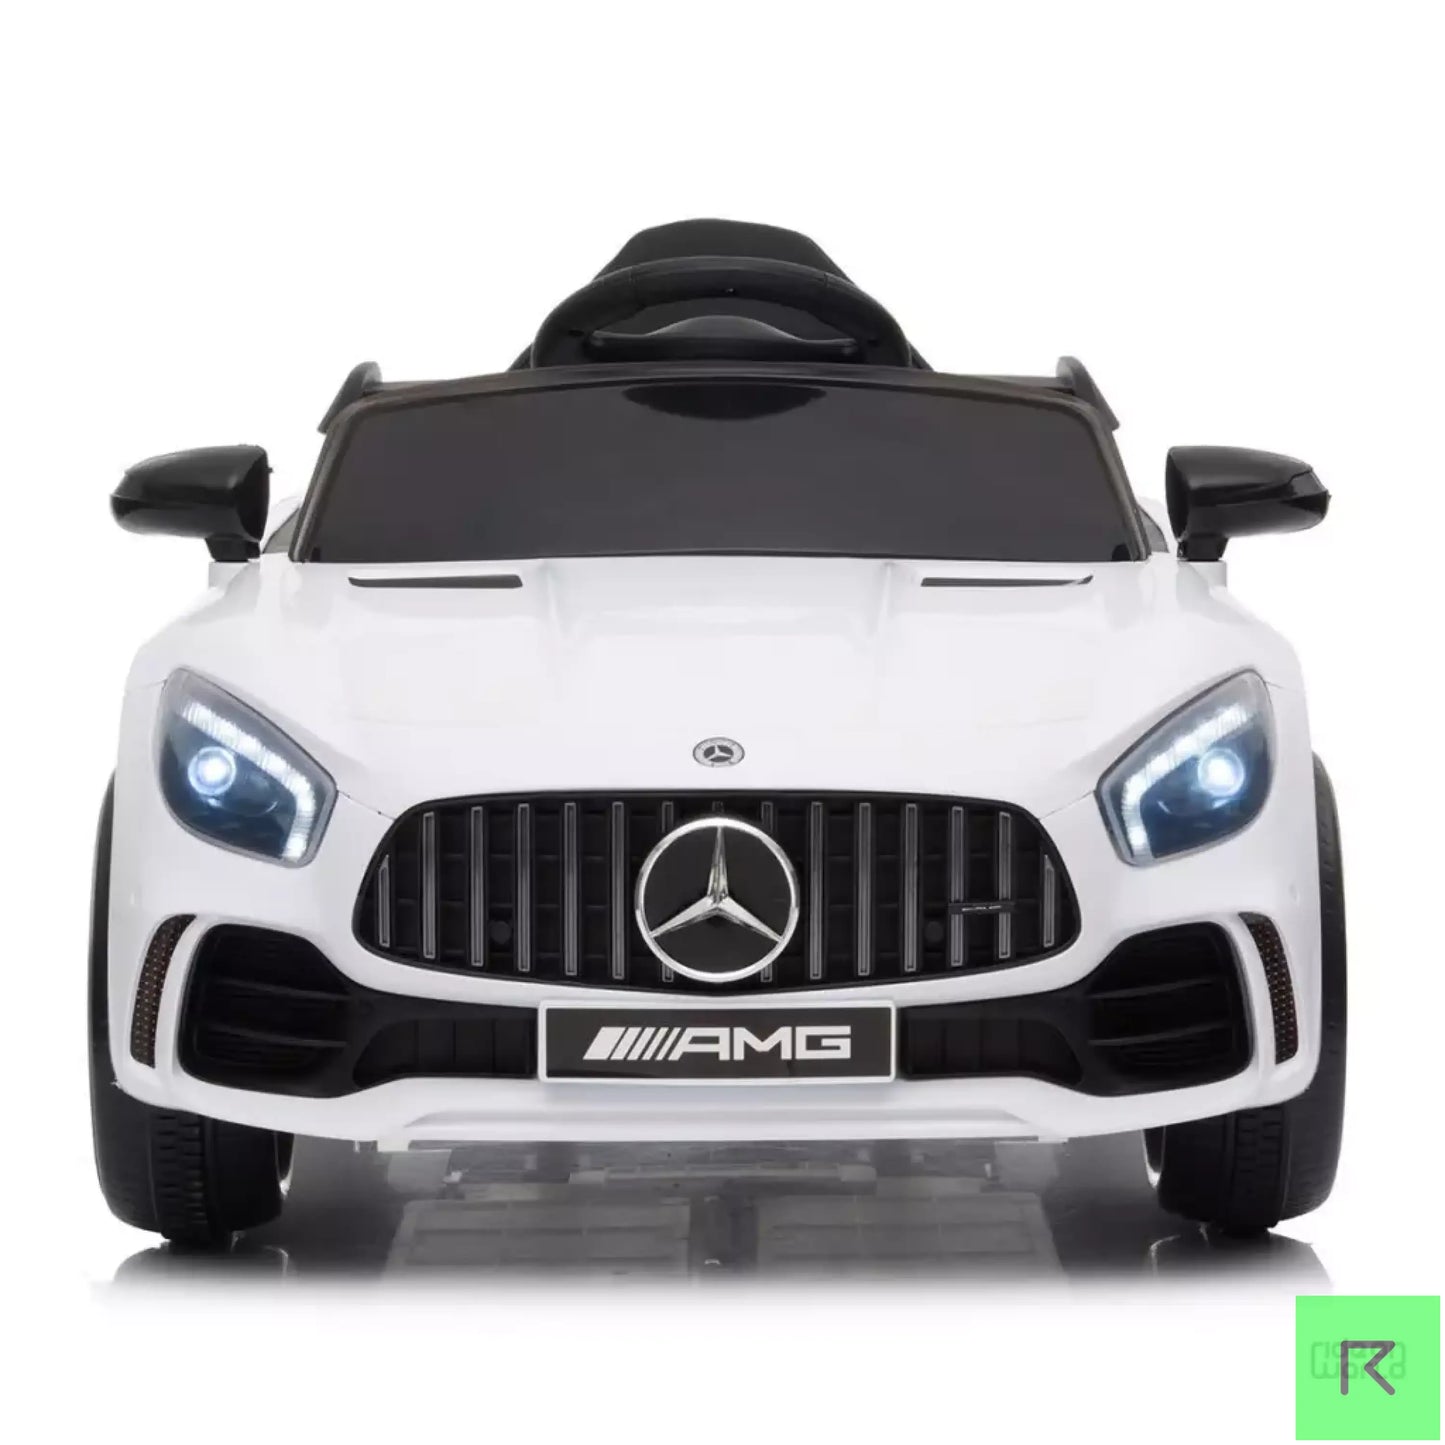 MERCEDES BENZ WHITE Licensed Kids Electric Ride On Car Remote Control - White